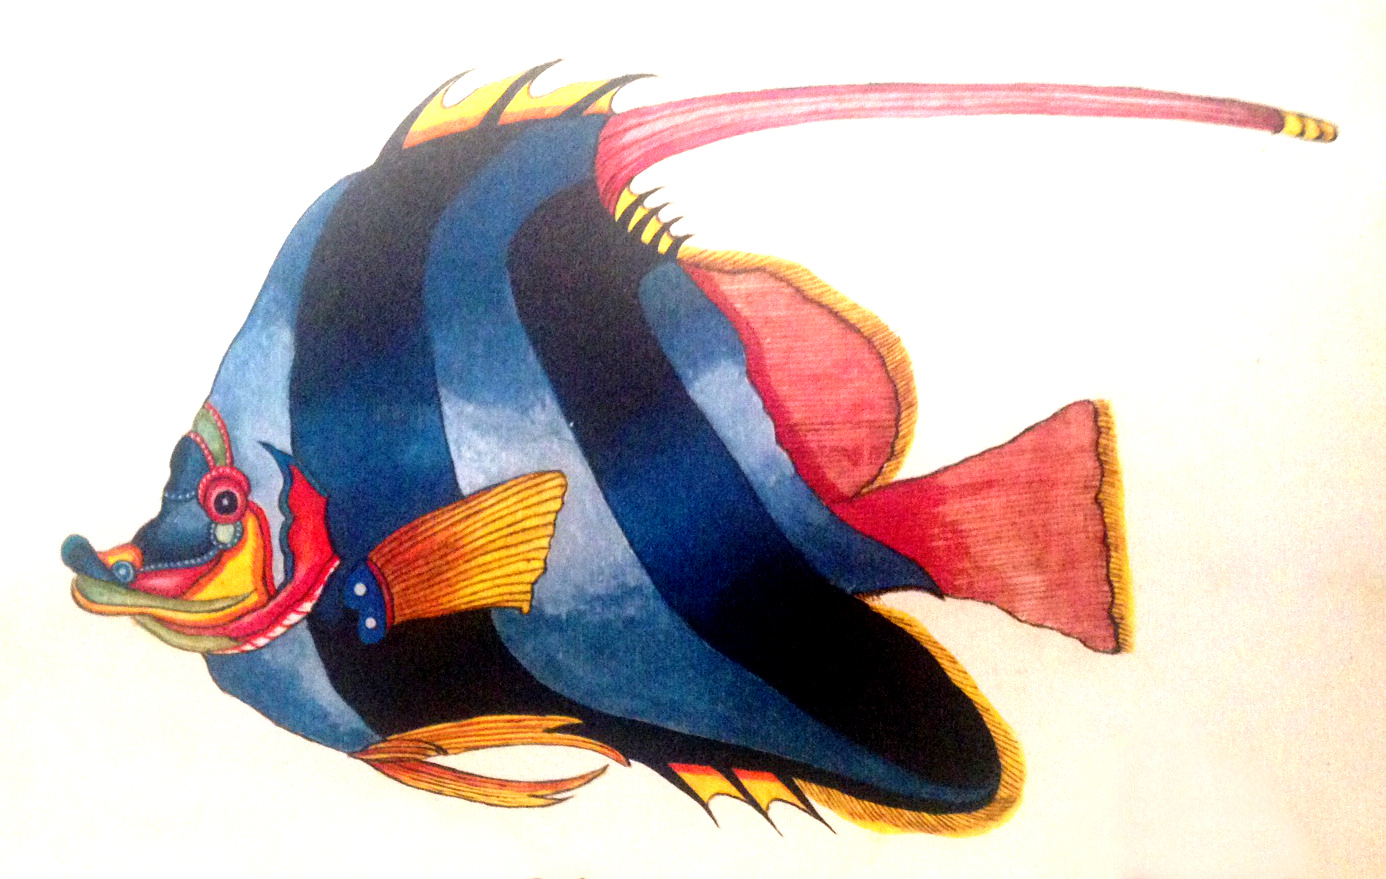 A rather respectable attempt at a Schooling Bannerfish.